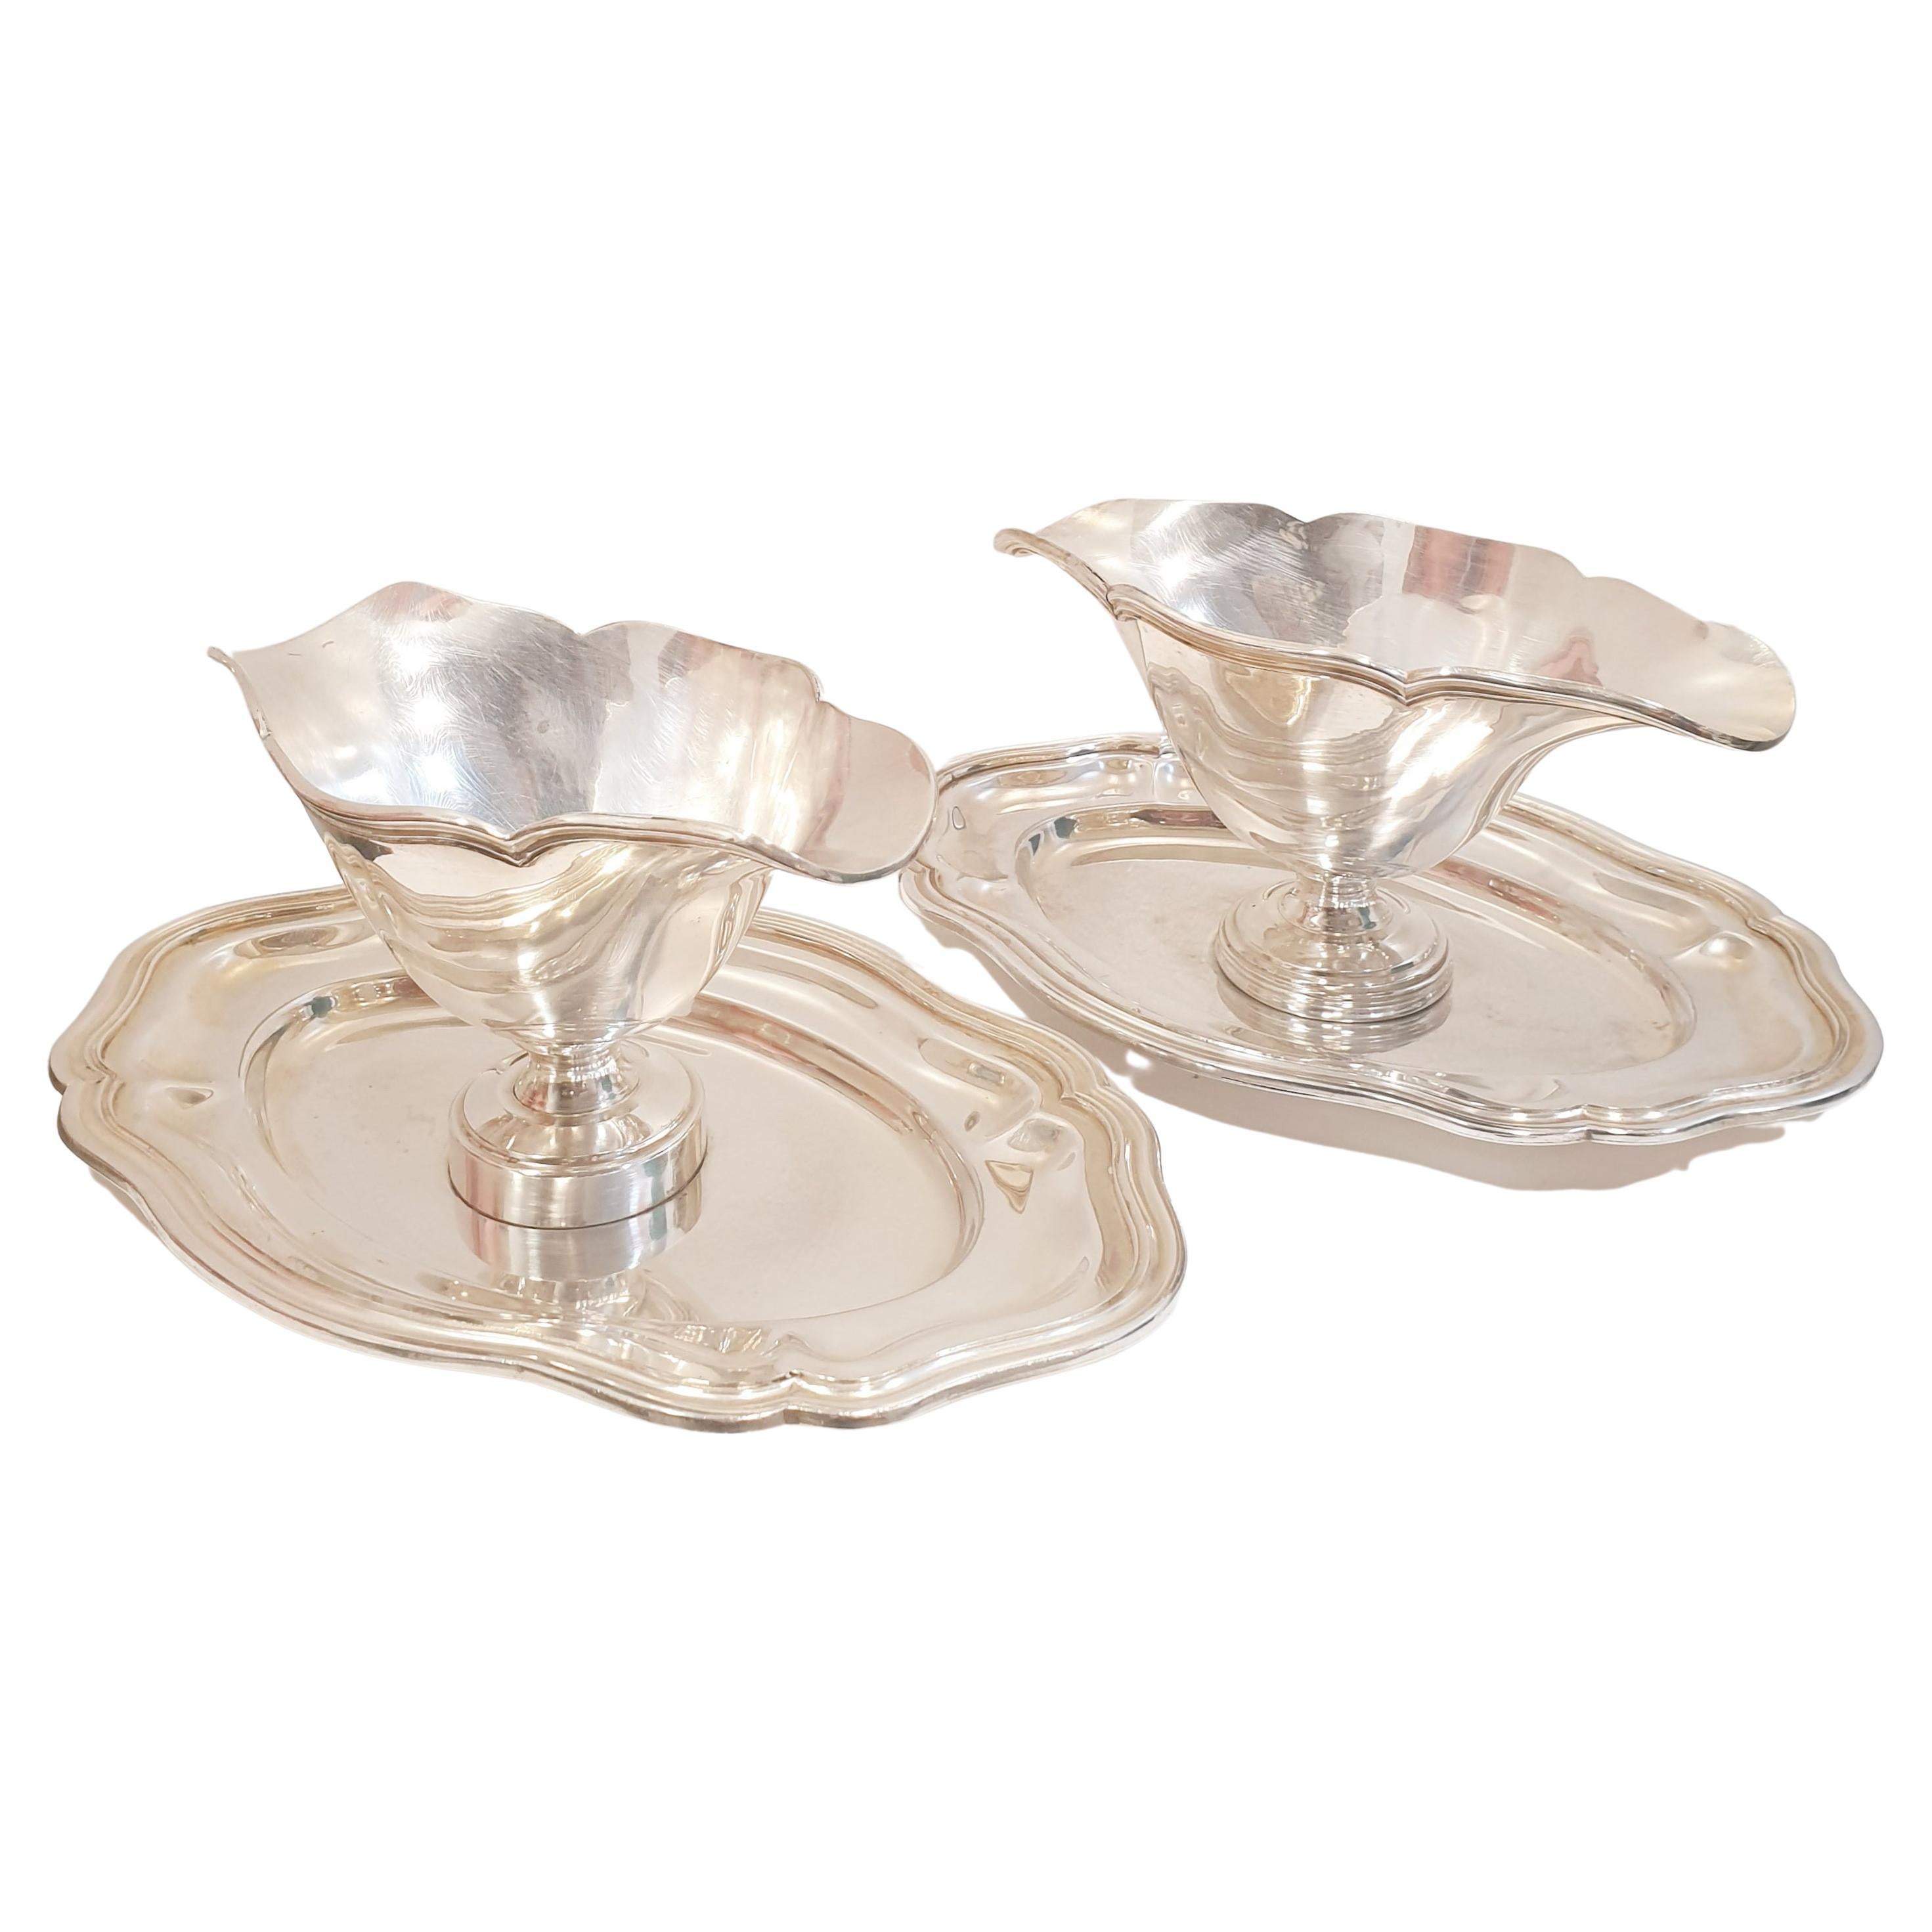 Set of 2 Antique Silver Sauce Boats from the 19th Century